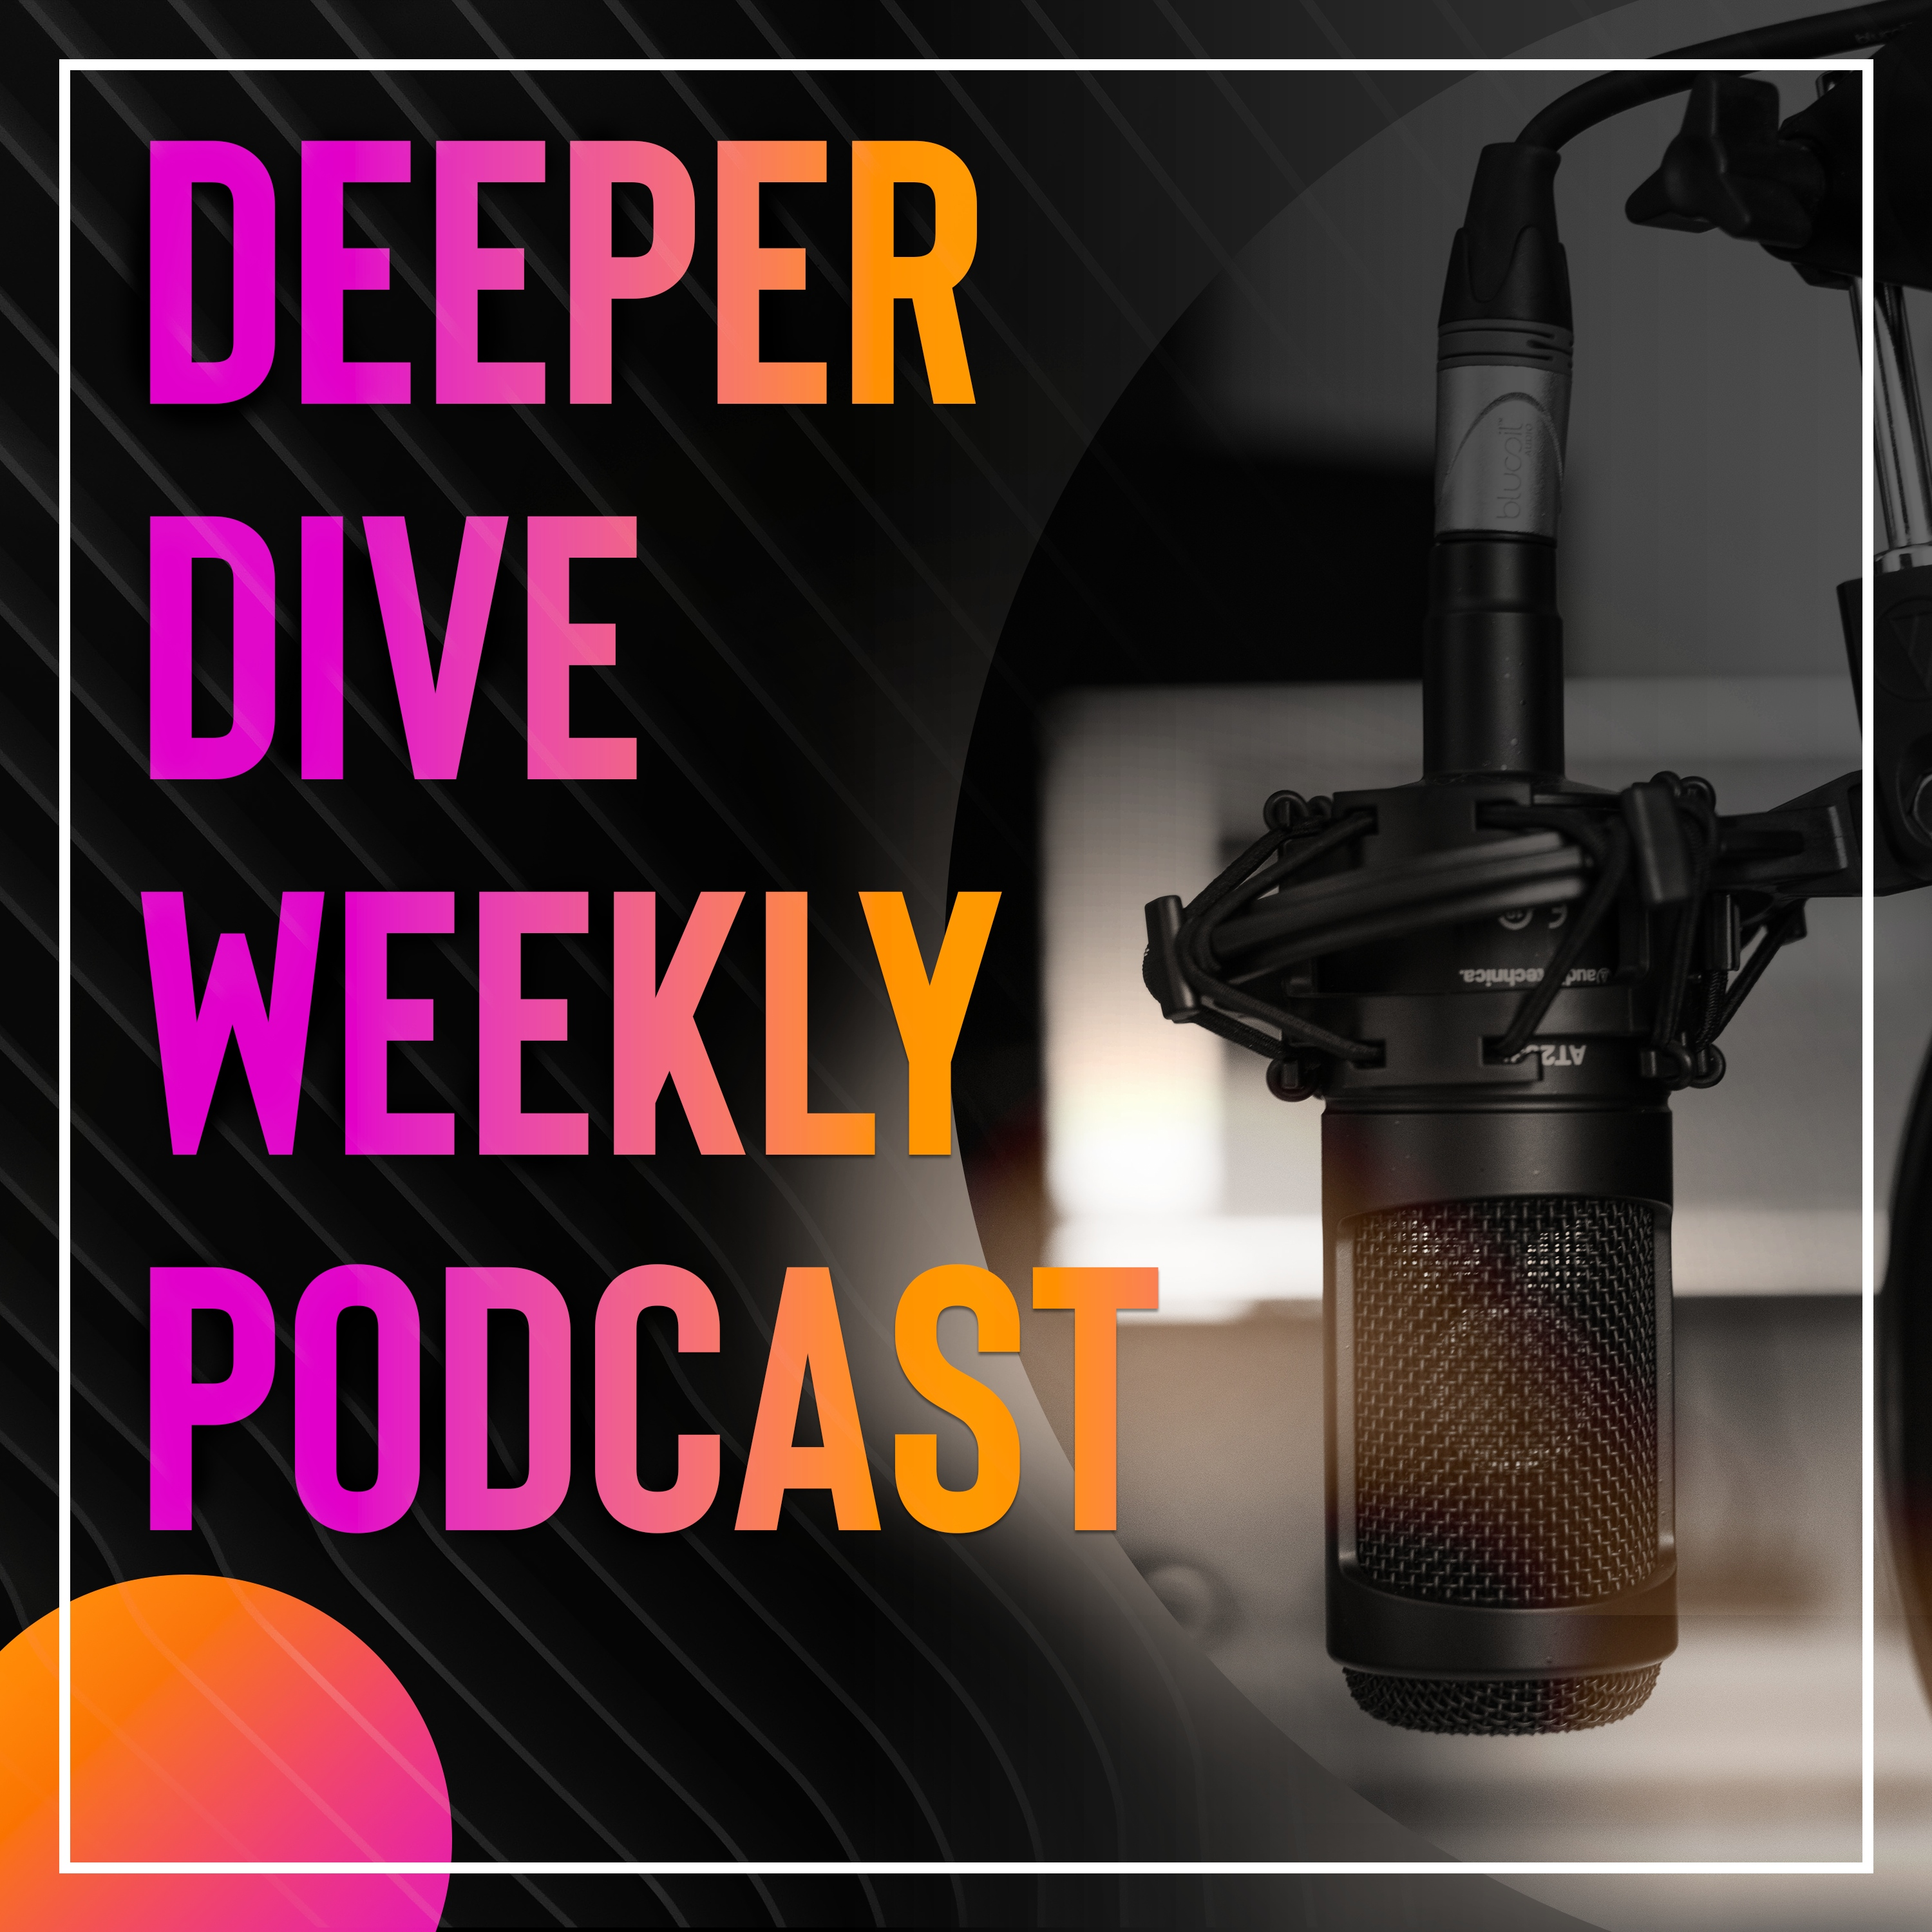 Deeper Dive Season 5 Episode 9: The Best Is Yet To Come